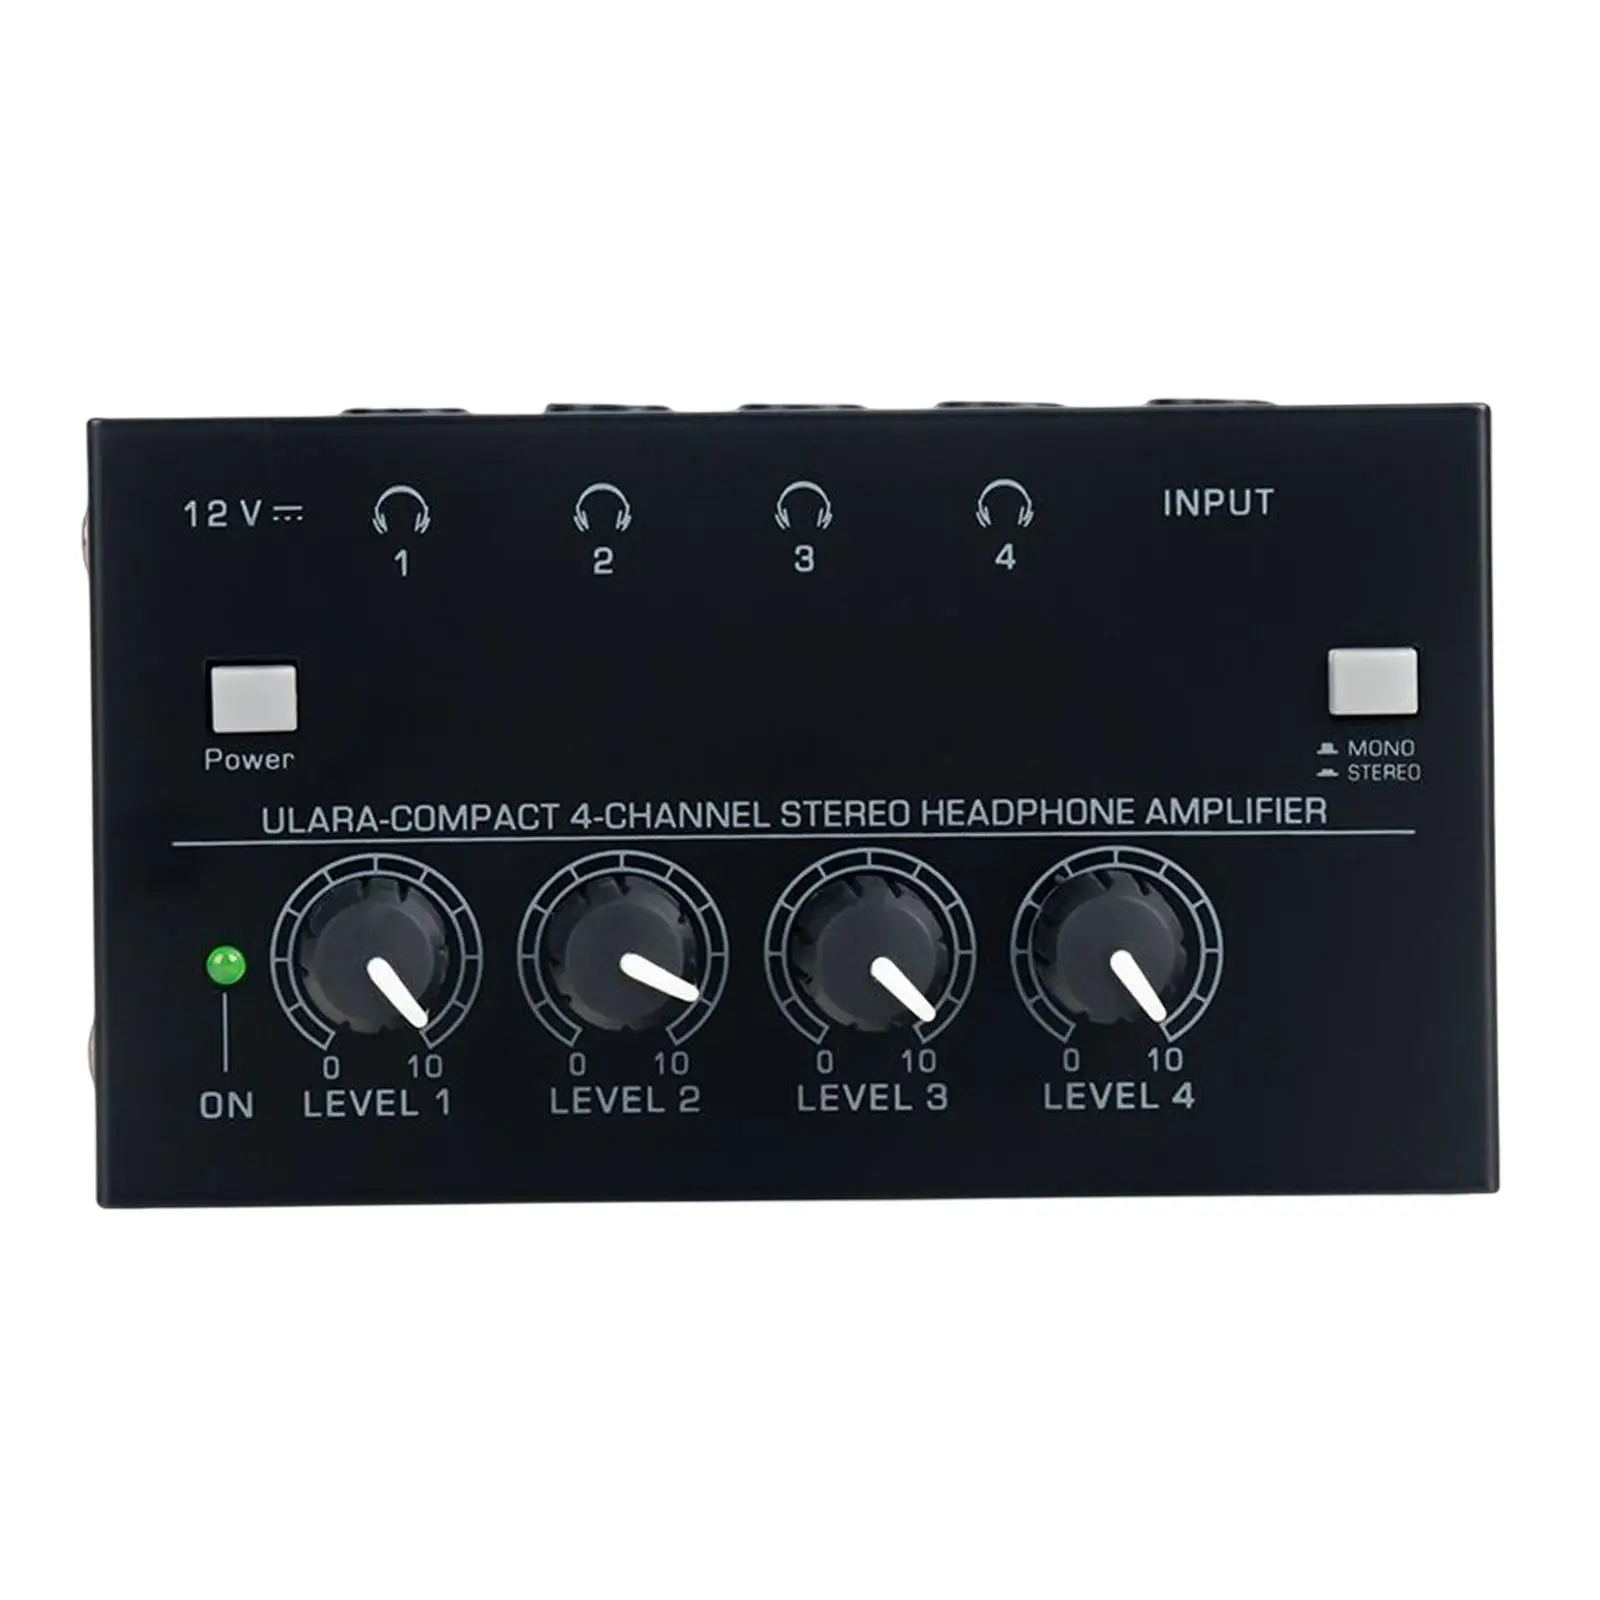 Headphone Amplifier Stereo Audio Amplifier 4 Channel Multi Channel Headphone Splitter Amp Stereo Headphone Amp for Sound Mixer